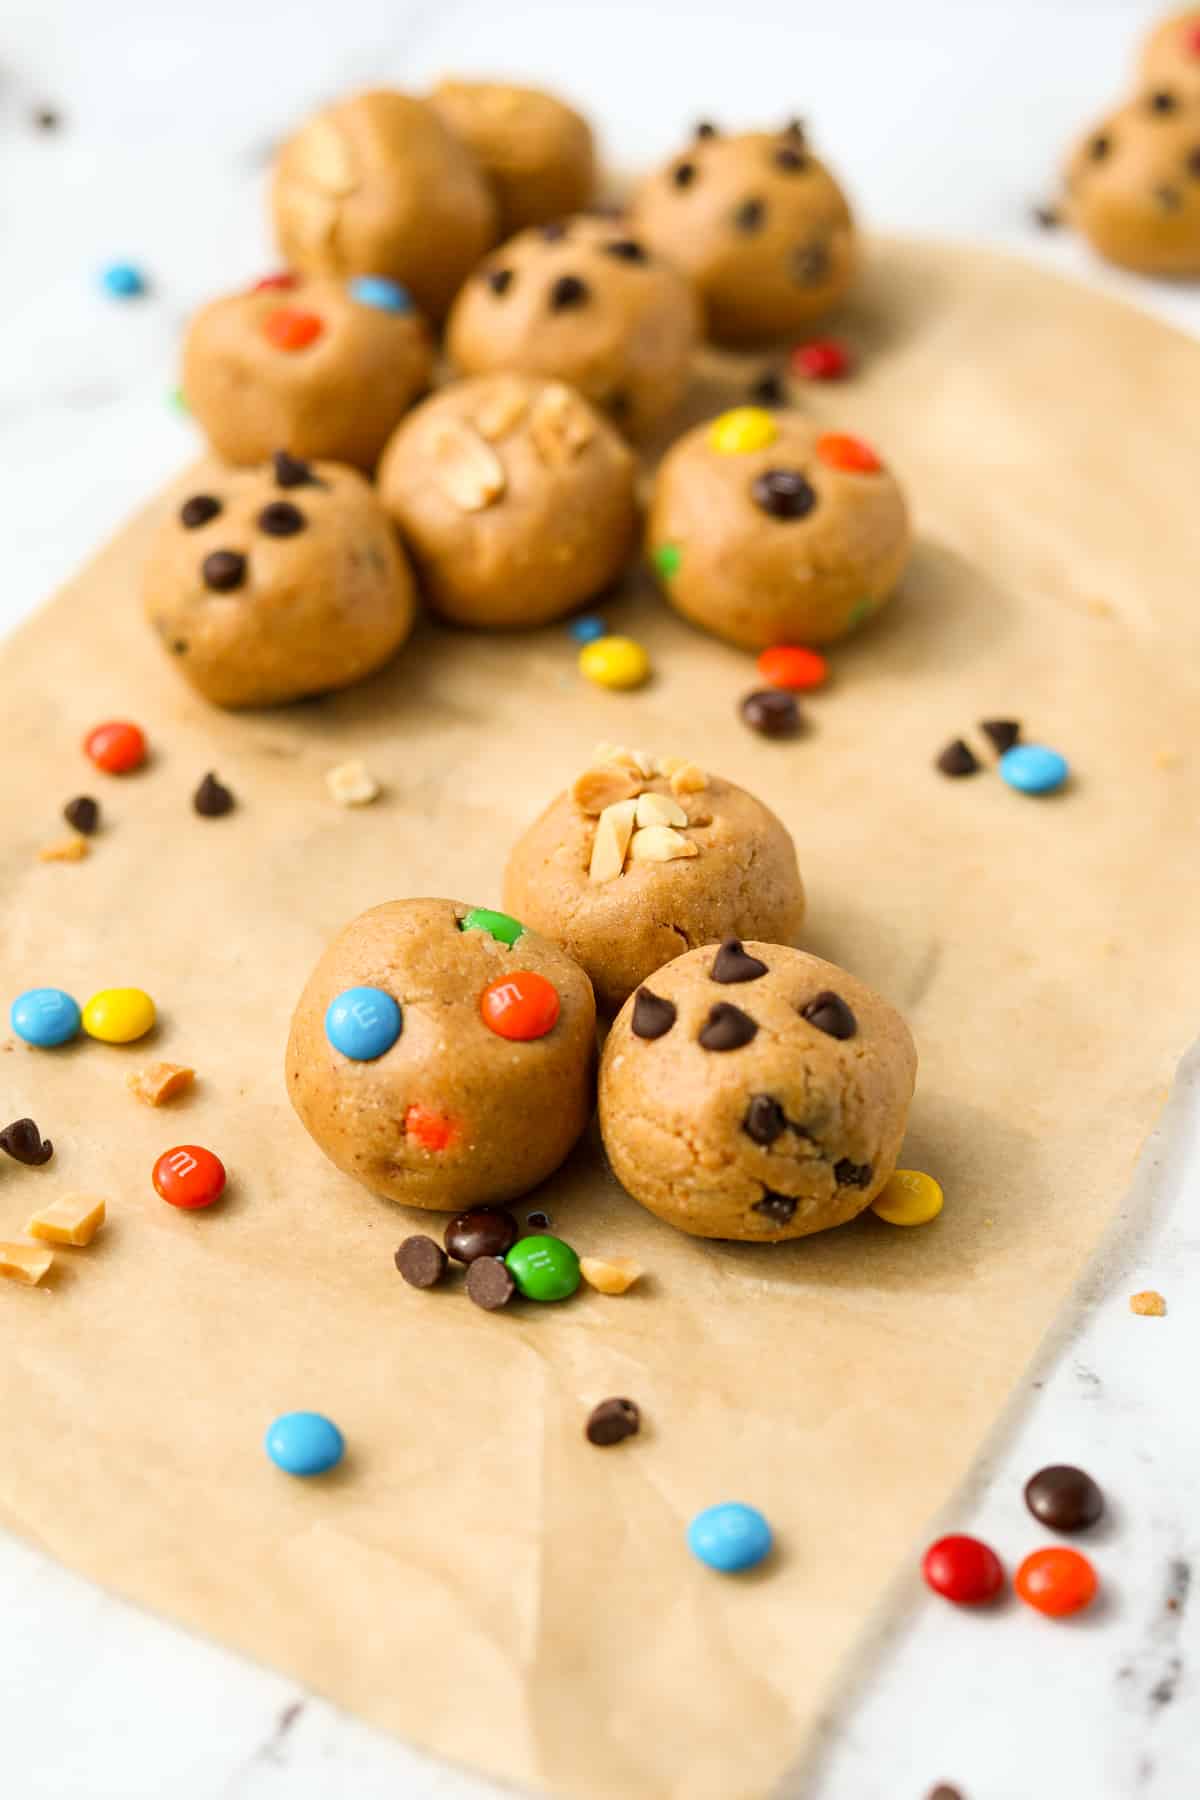 Three protein cookie dough balls in the center, with others on the sidelines.